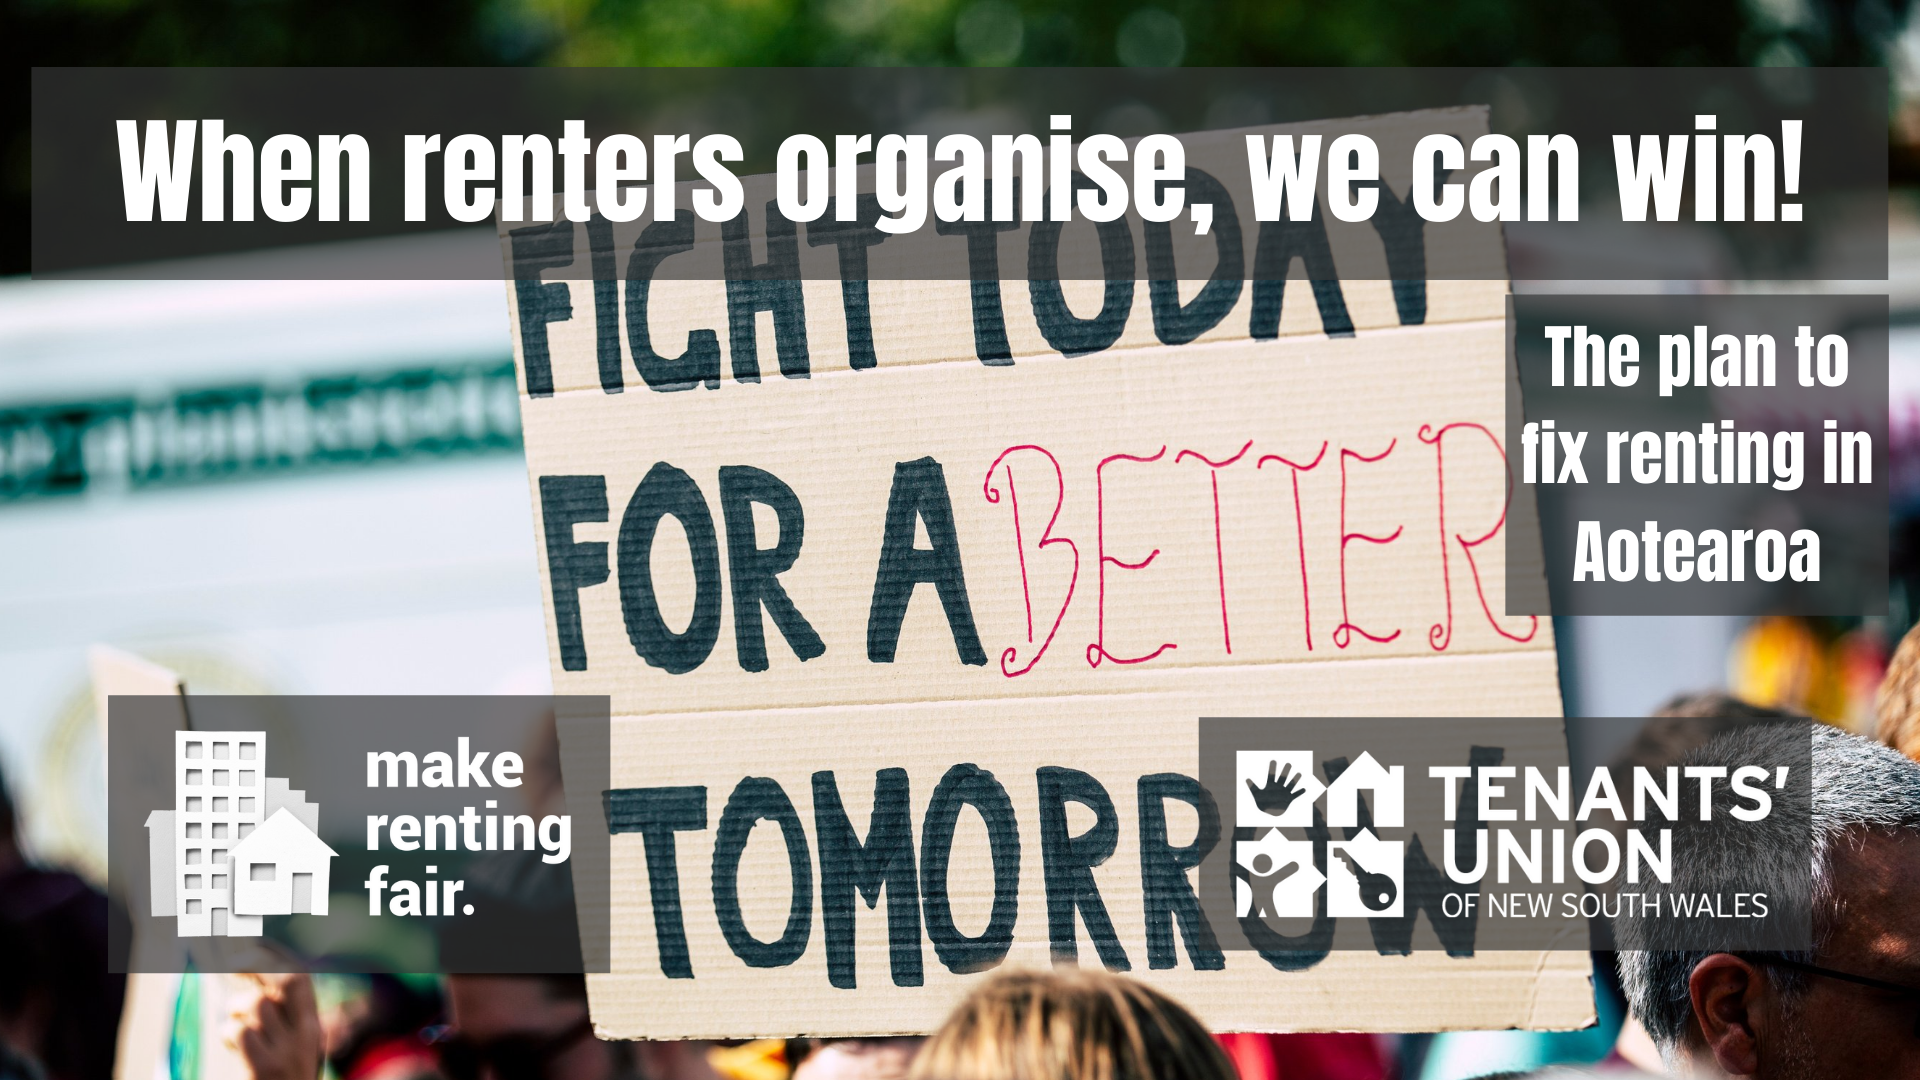 When renters organise, we can win!